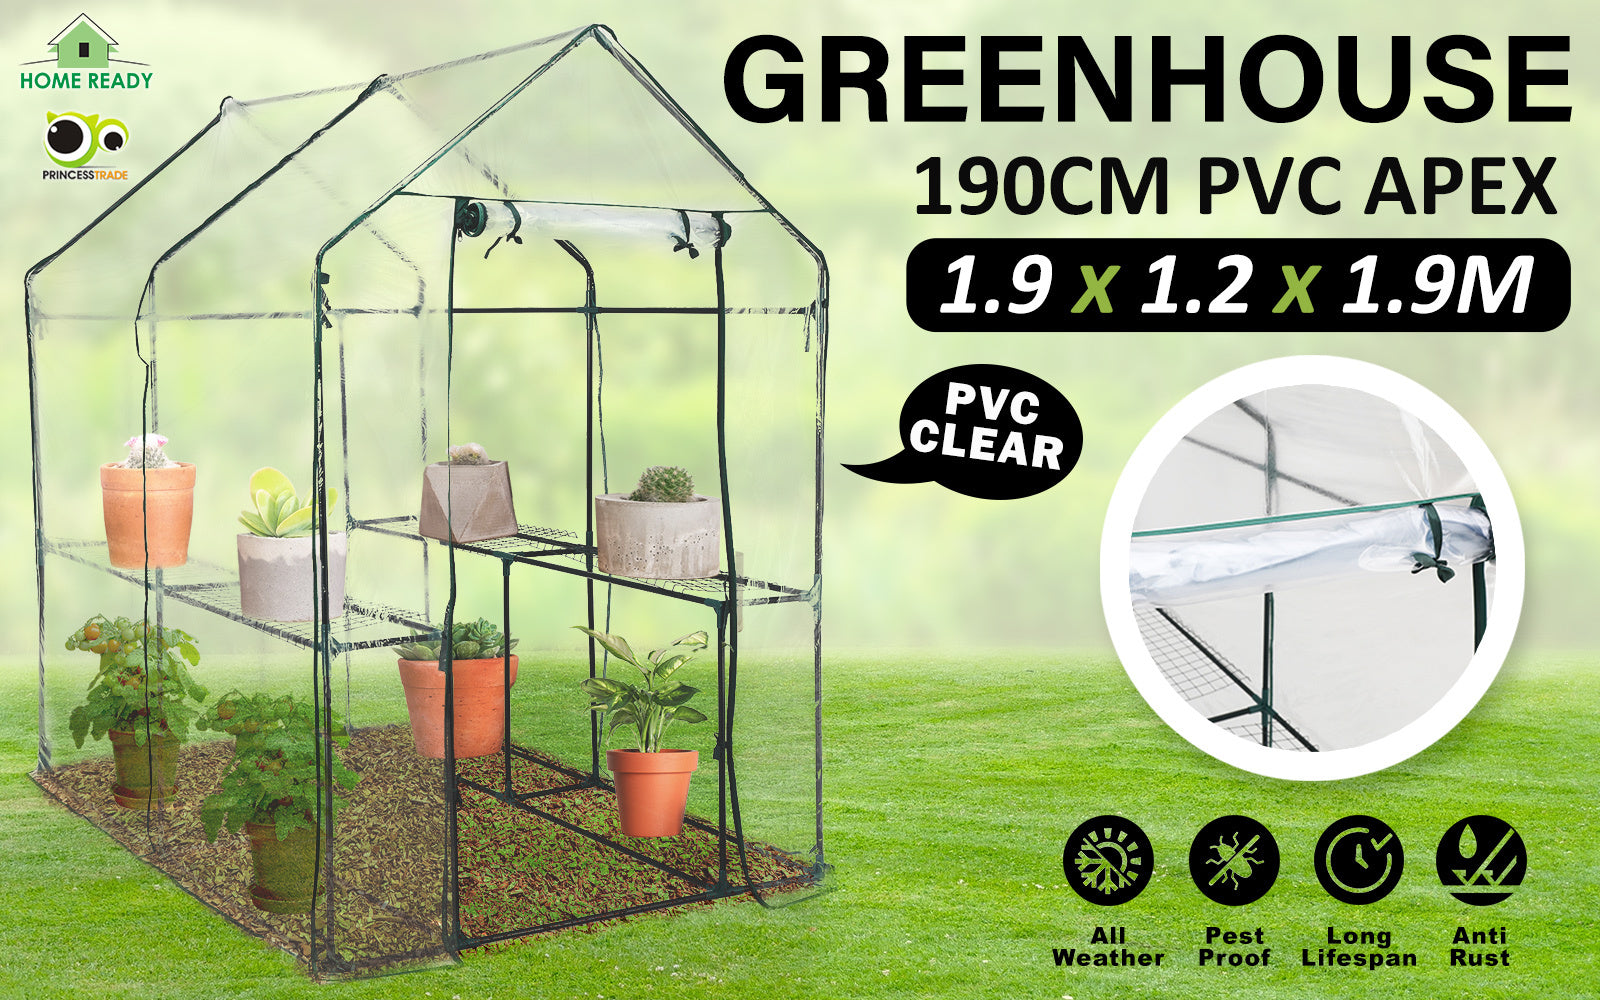 Home Ready Apex 1.9x1.2x1.9M Garden Greenhouse Walk-In Shed PVC